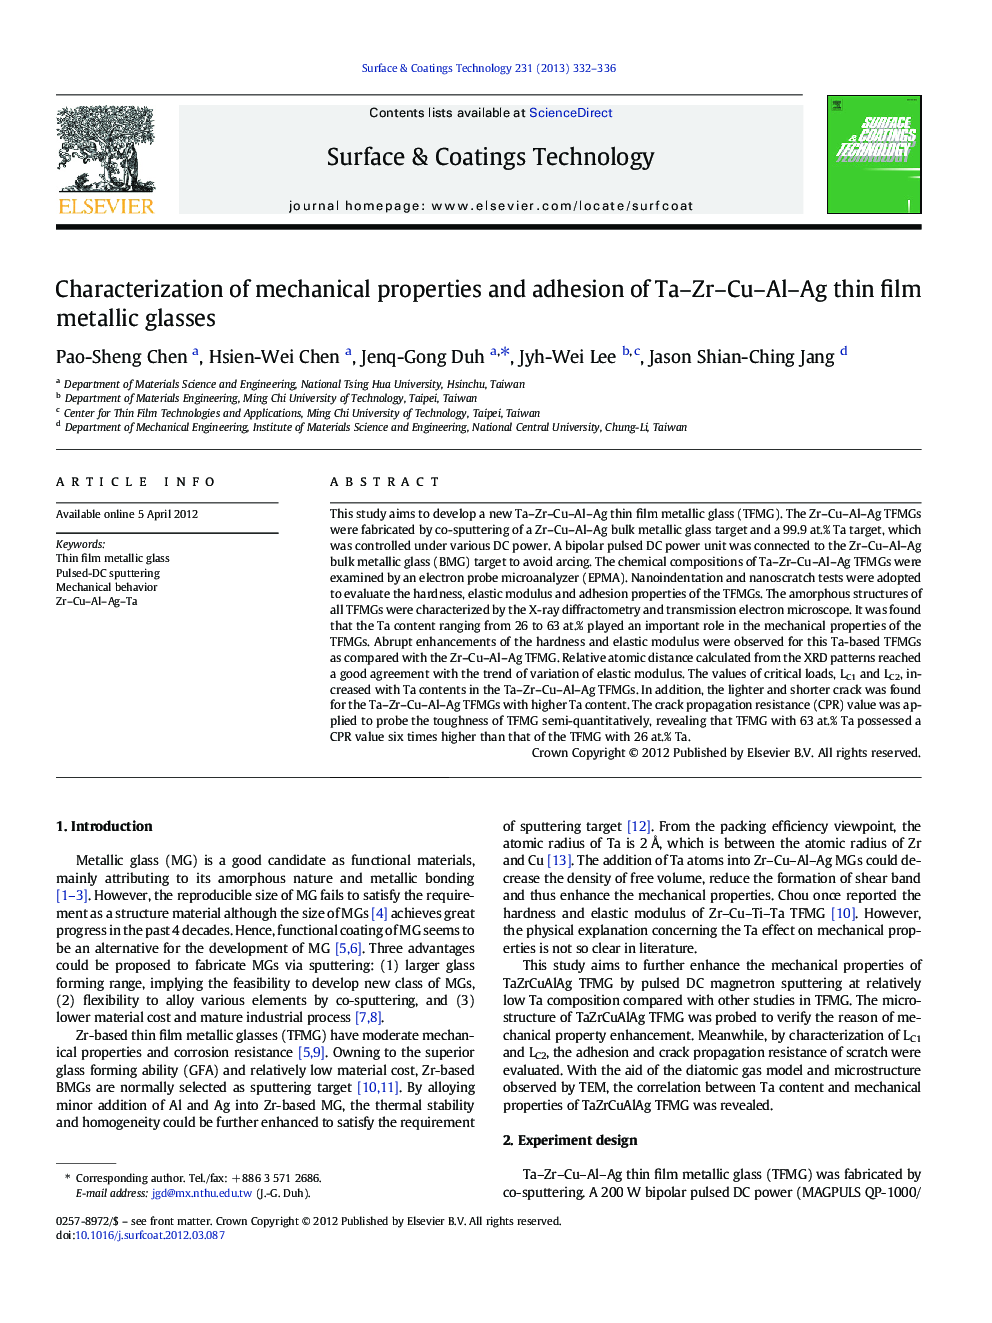 Characterization of mechanical properties and adhesion of Ta–Zr–Cu–Al–Ag thin film metallic glasses